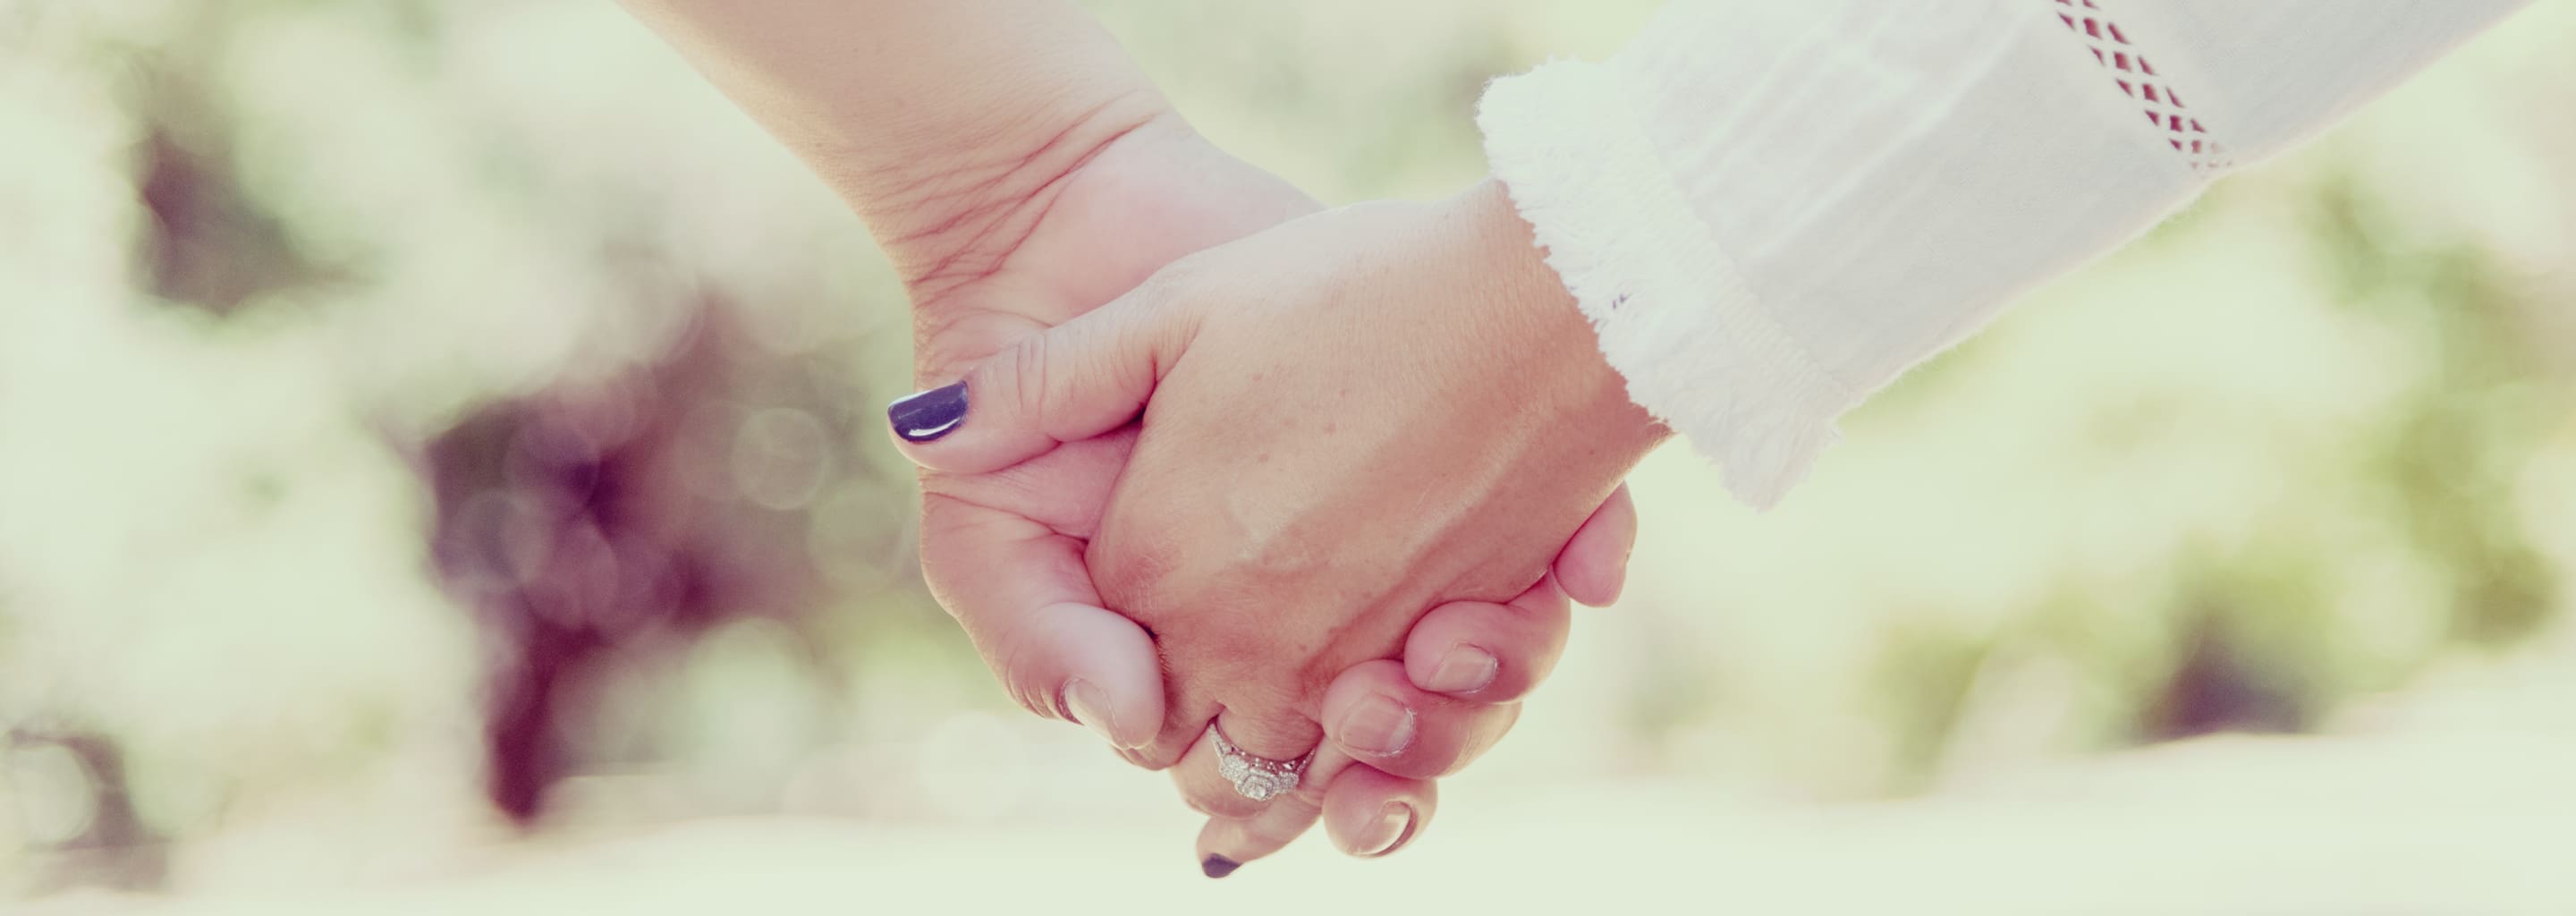 close image of bride and groom holding hands